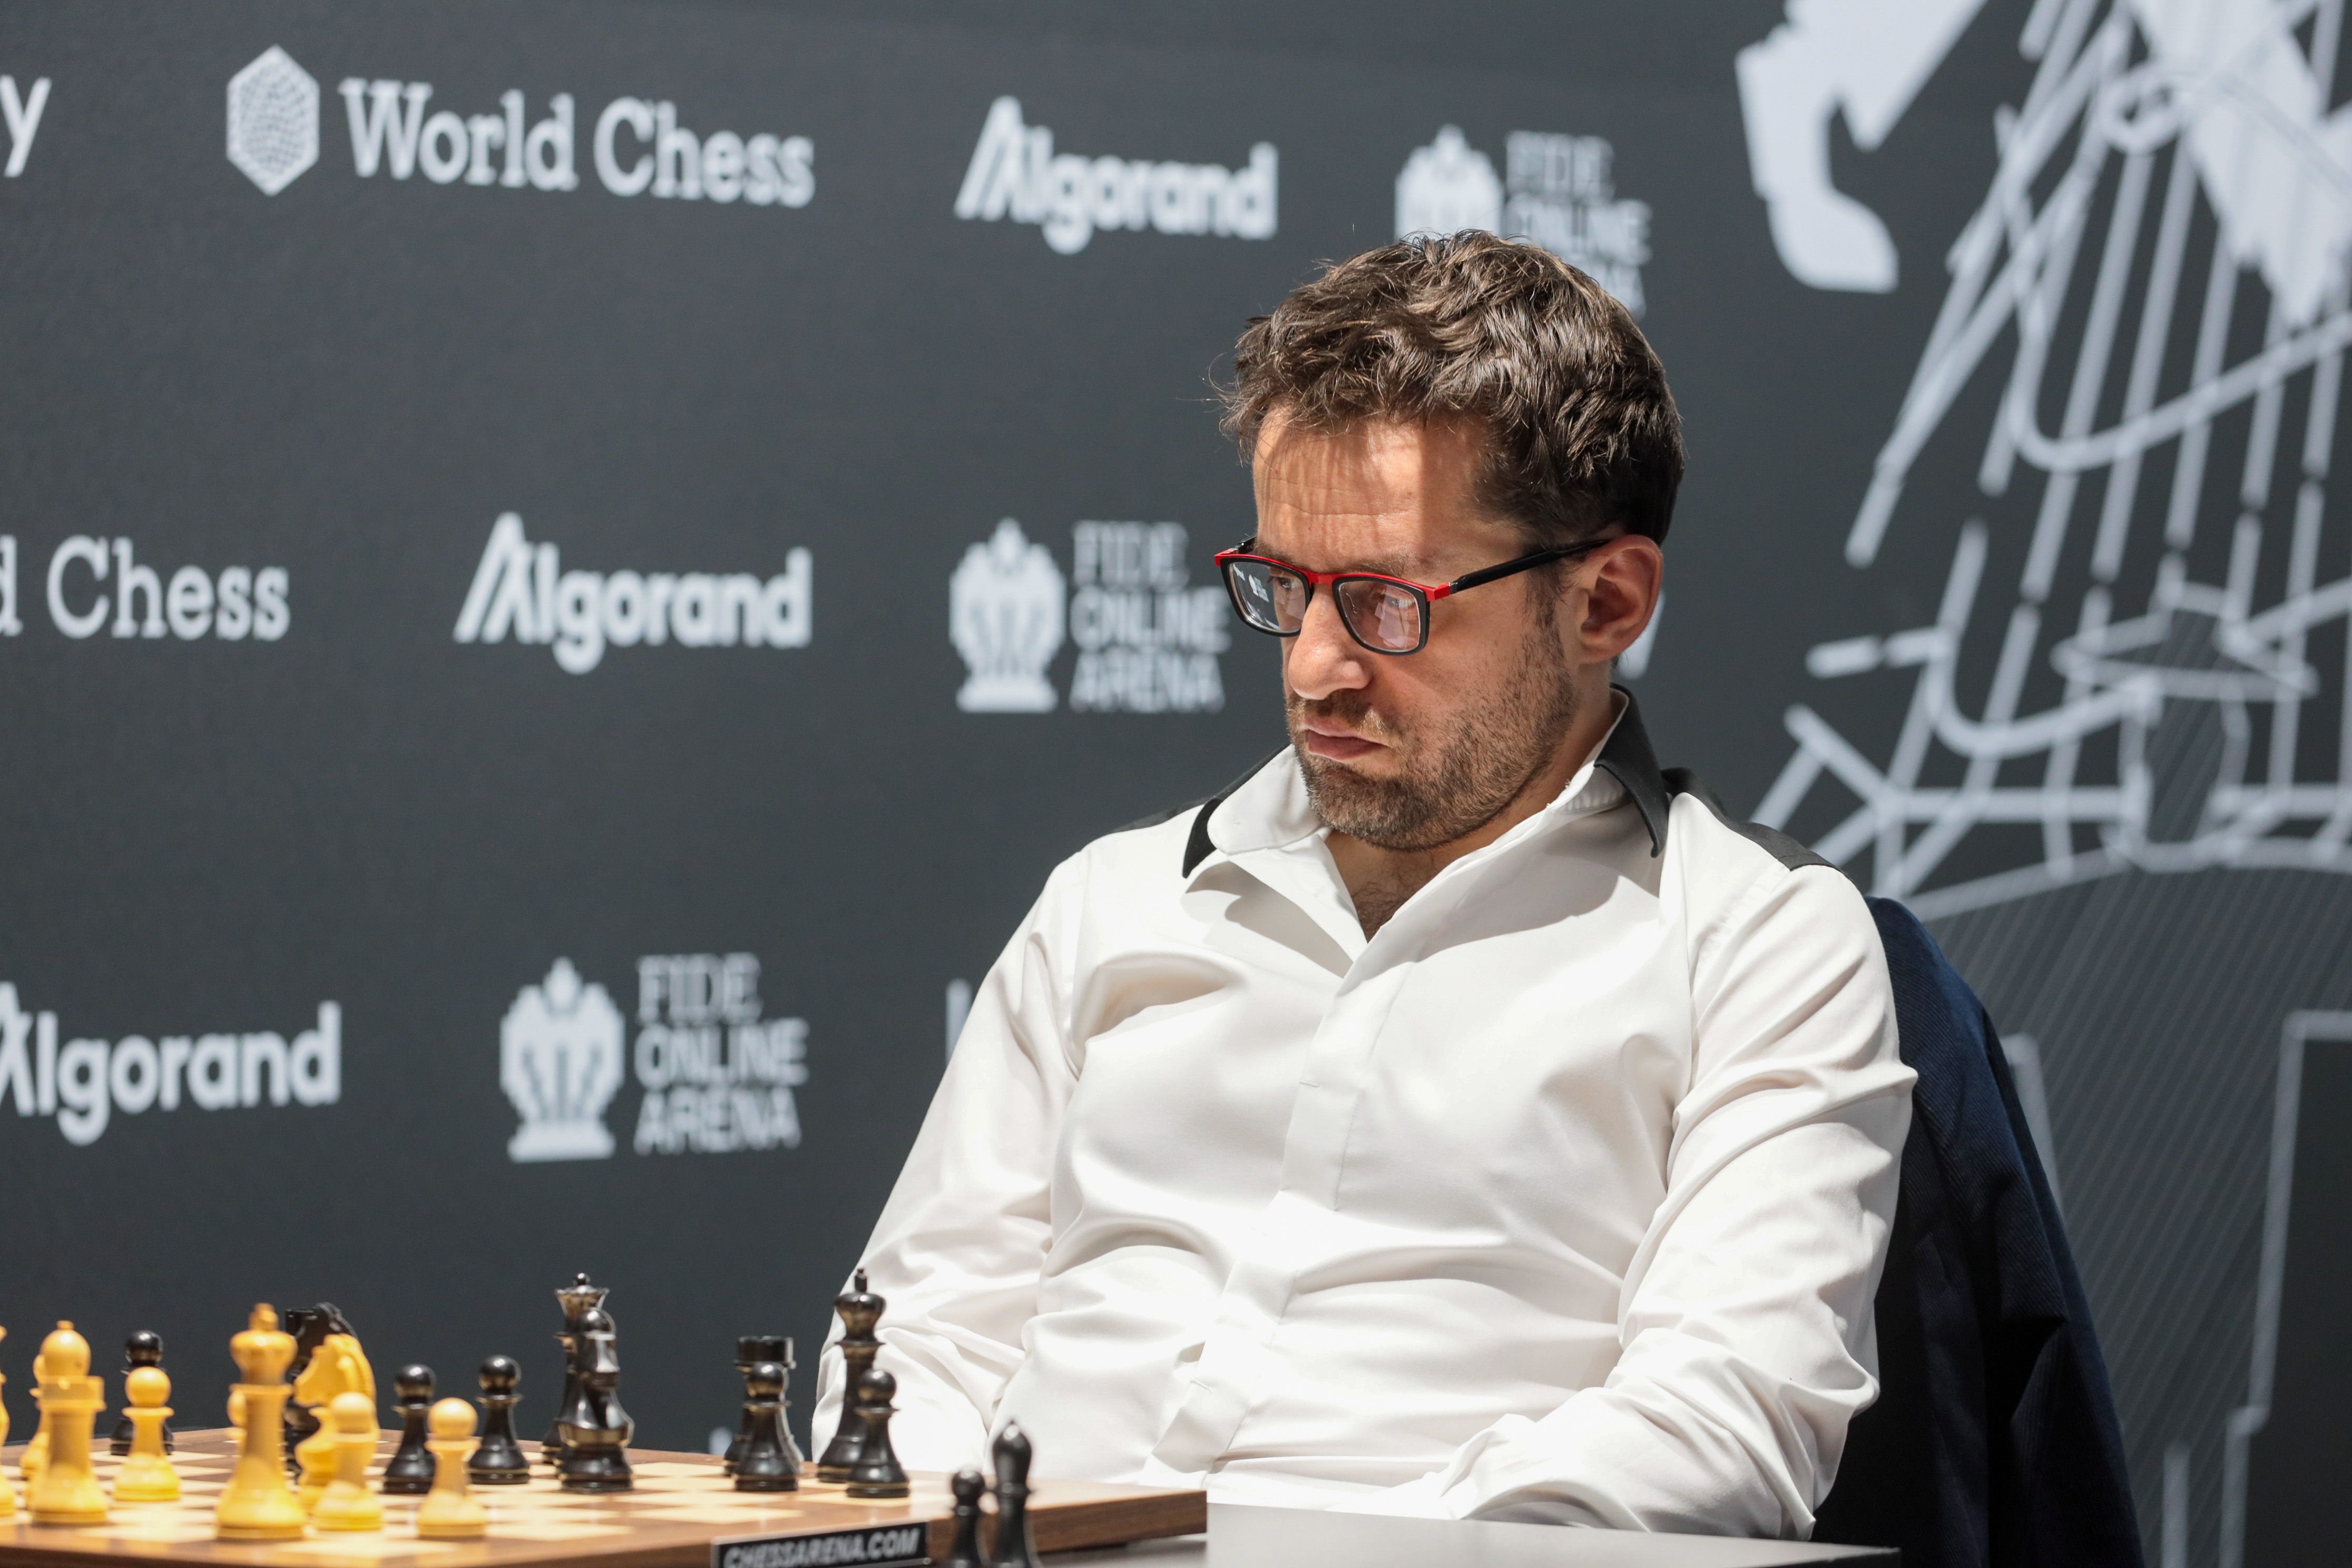 Nakamura and Aronian are the two FIDE Grand Prix 2022 finalists